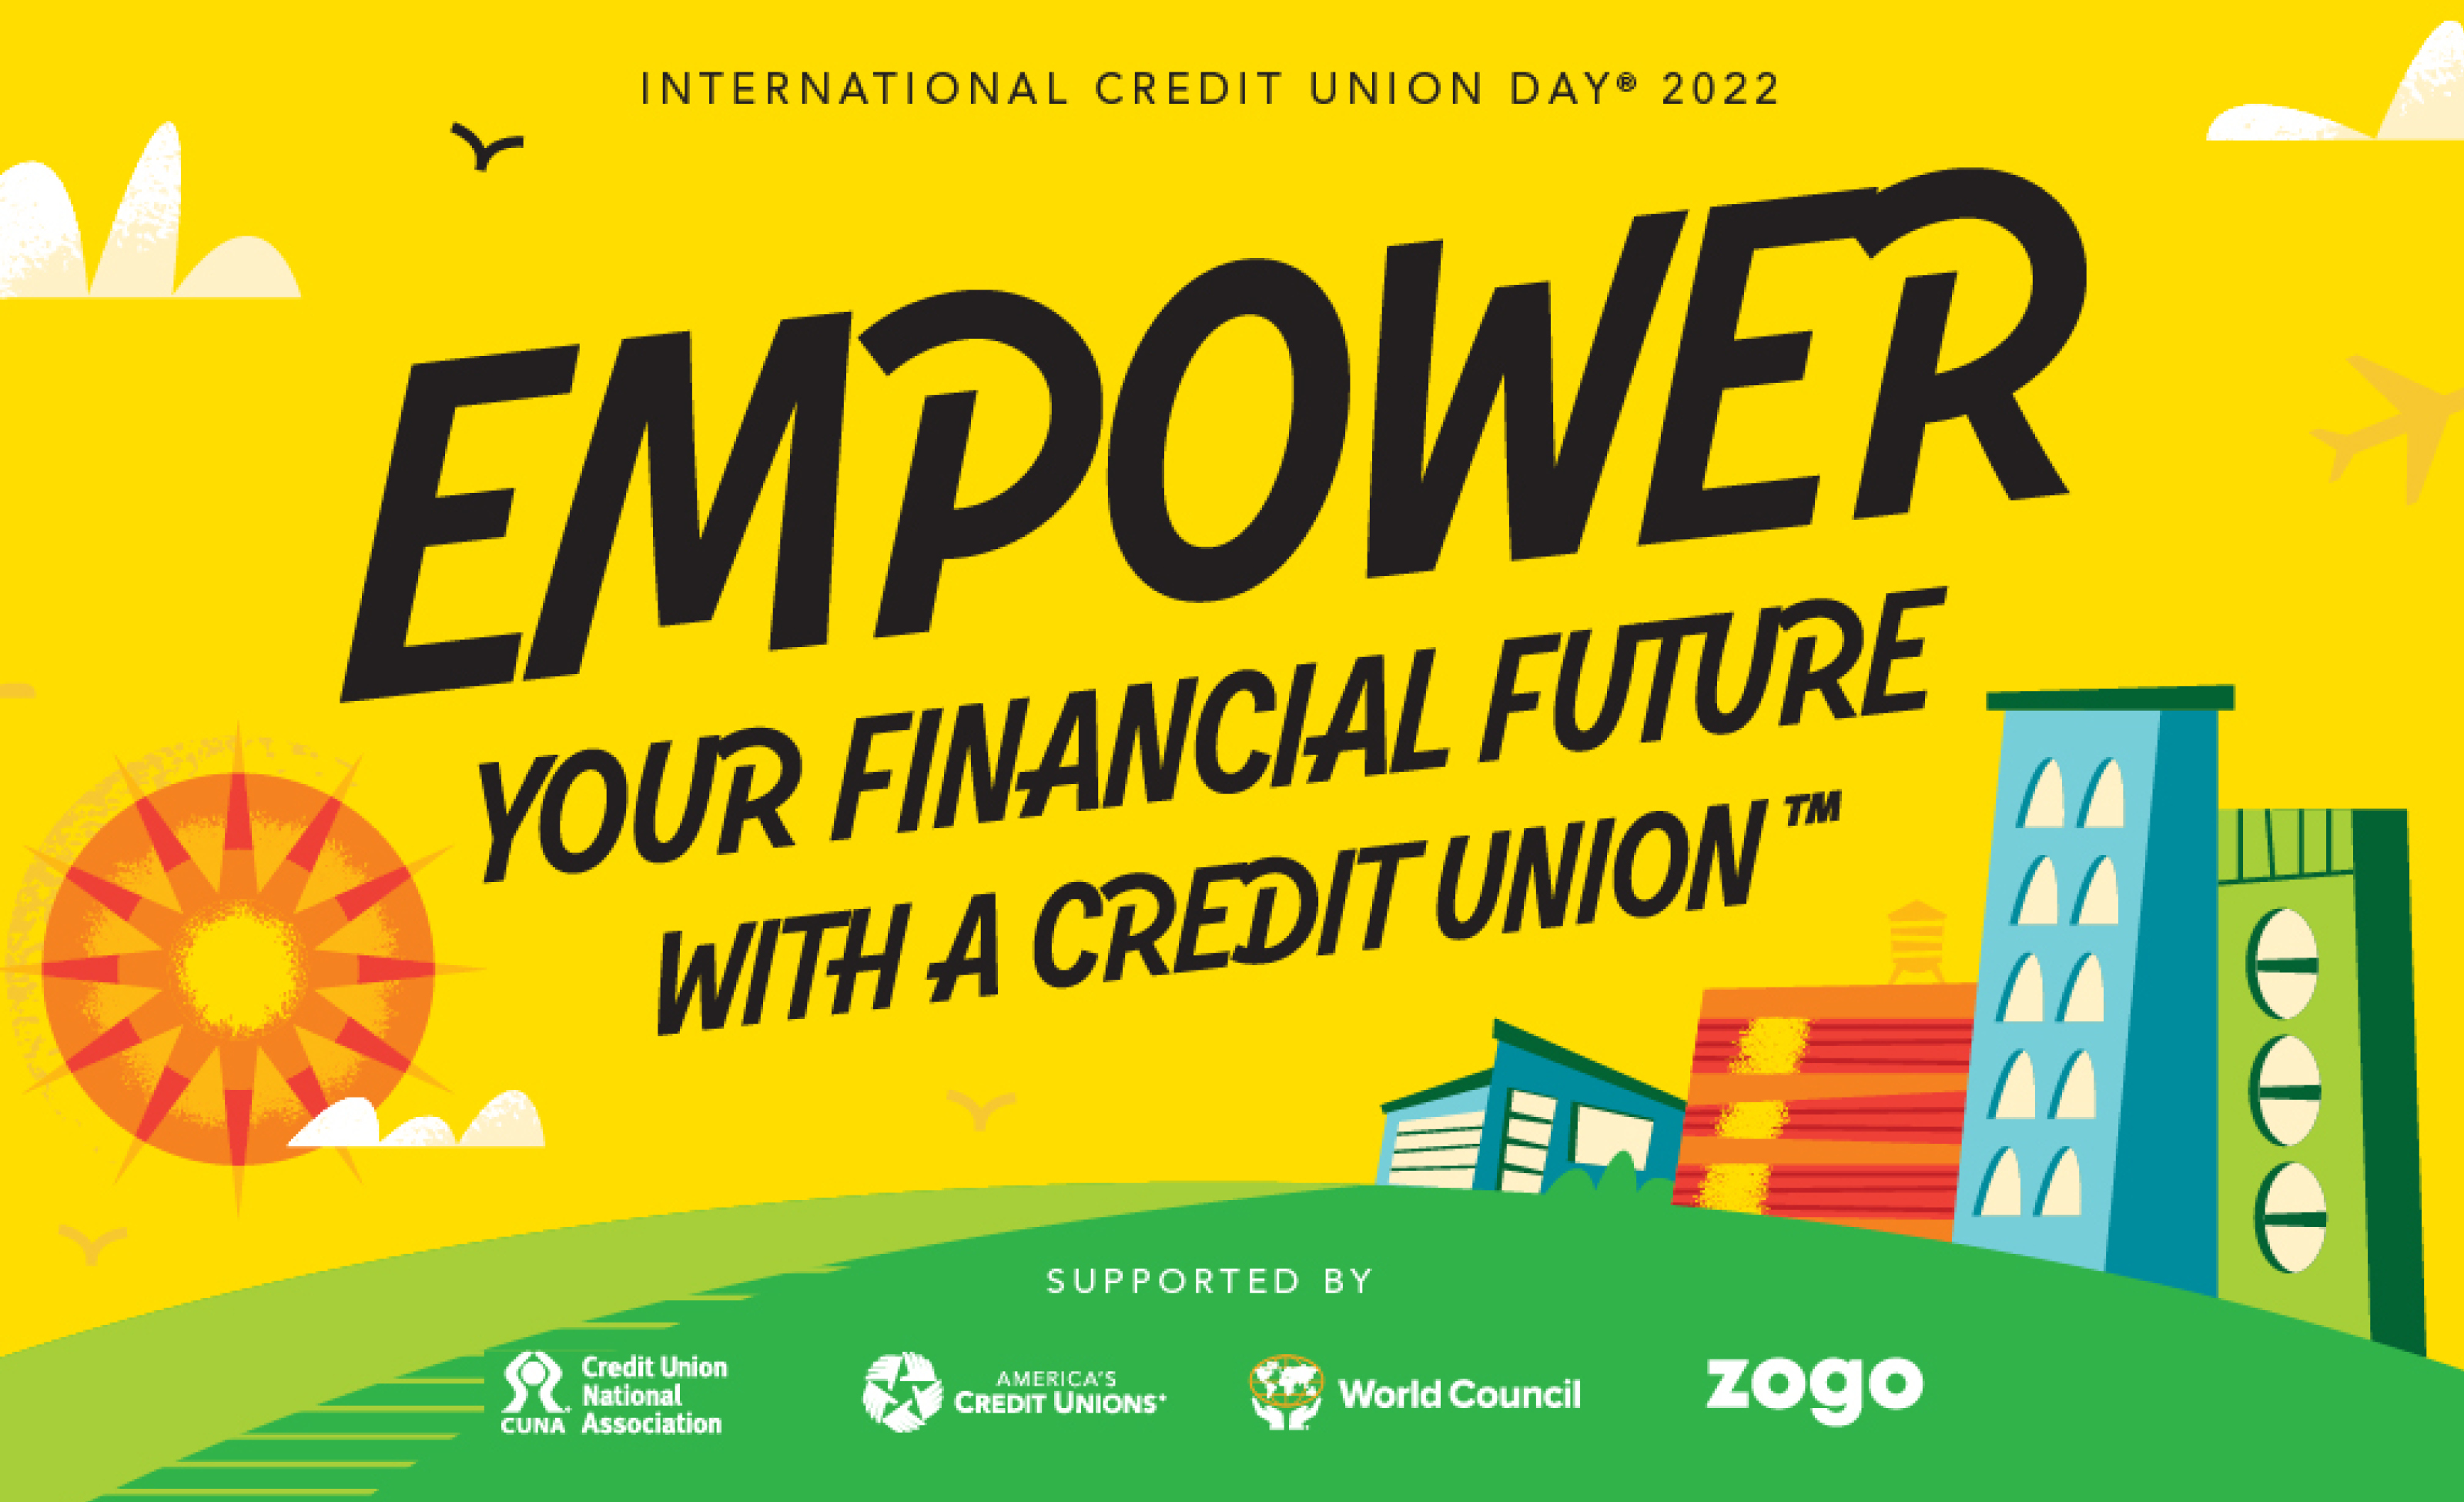 Members First is Celebrating International Credit Union Day!